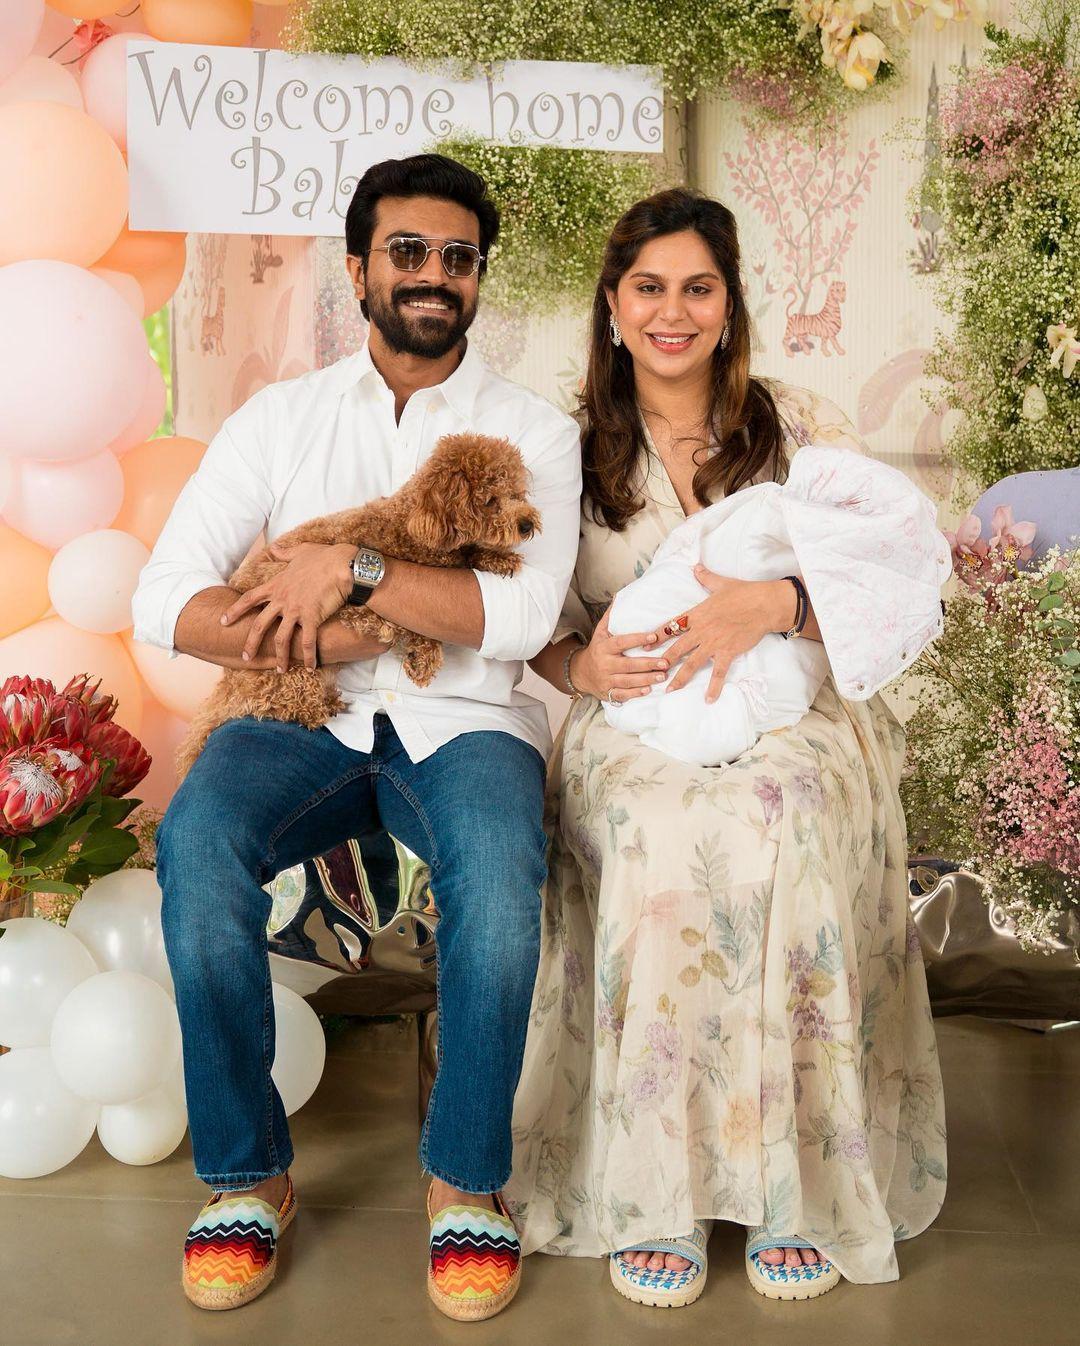 Ram Charan and Upasana Kamineni
RRR superstar Ram Charan and his wife Upasana welcomed a baby girl on June 20th after 11 years of marriage. They named their daughter Klin Kaara Konidela during her naming ceremony